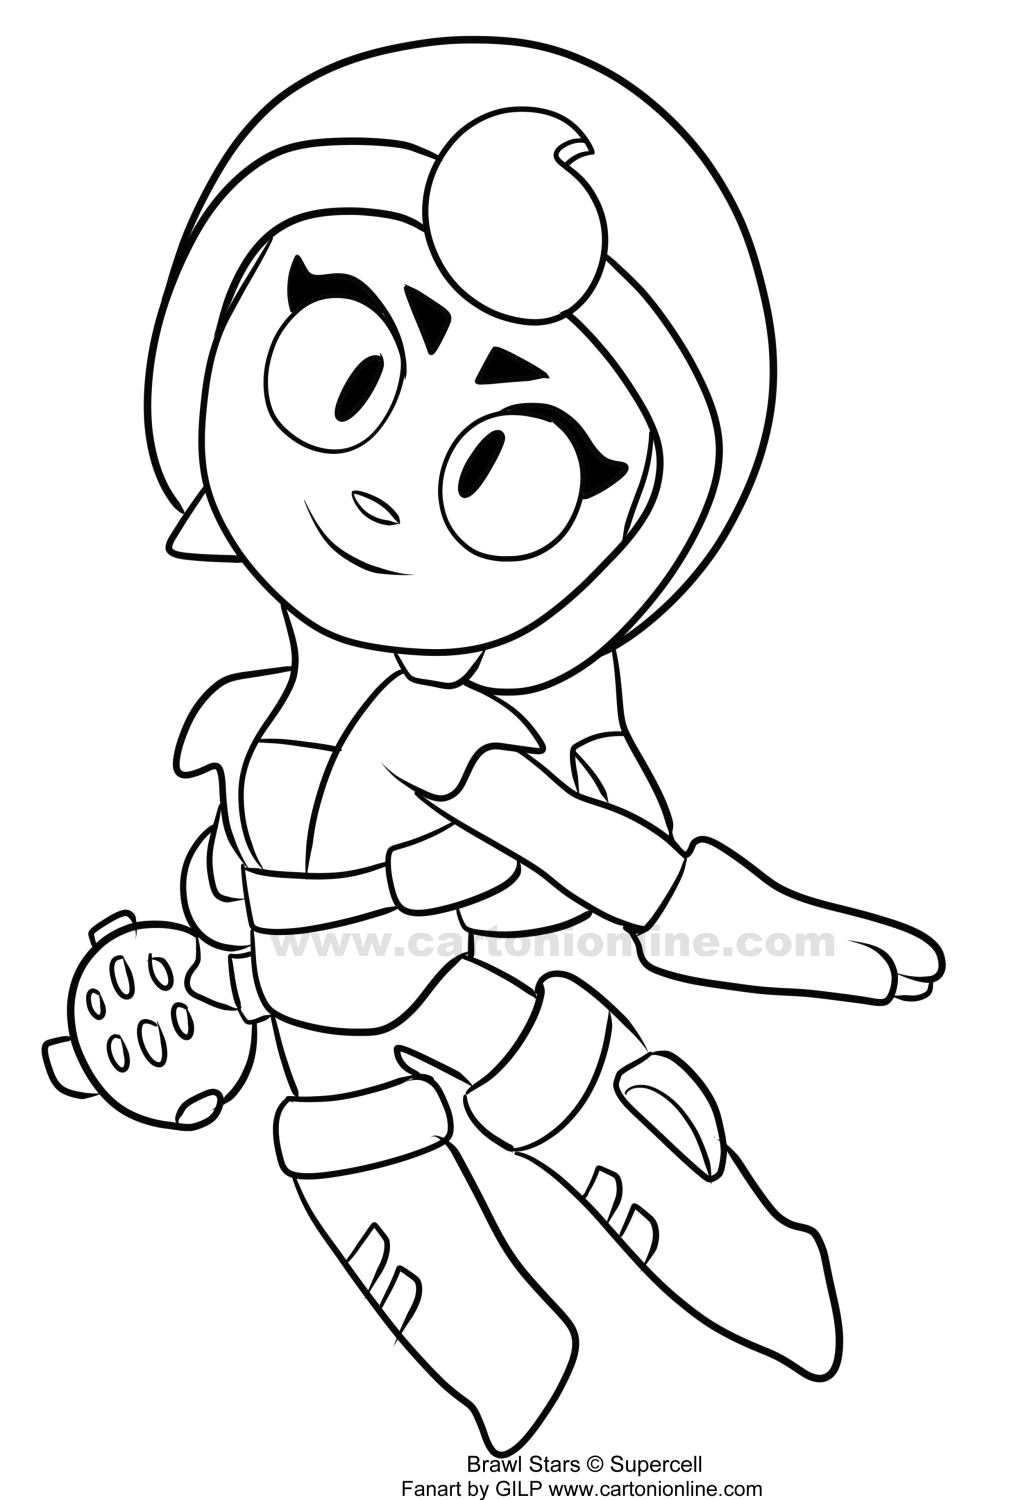 Janet 04 Brawl Stars coloring page to print and coloring